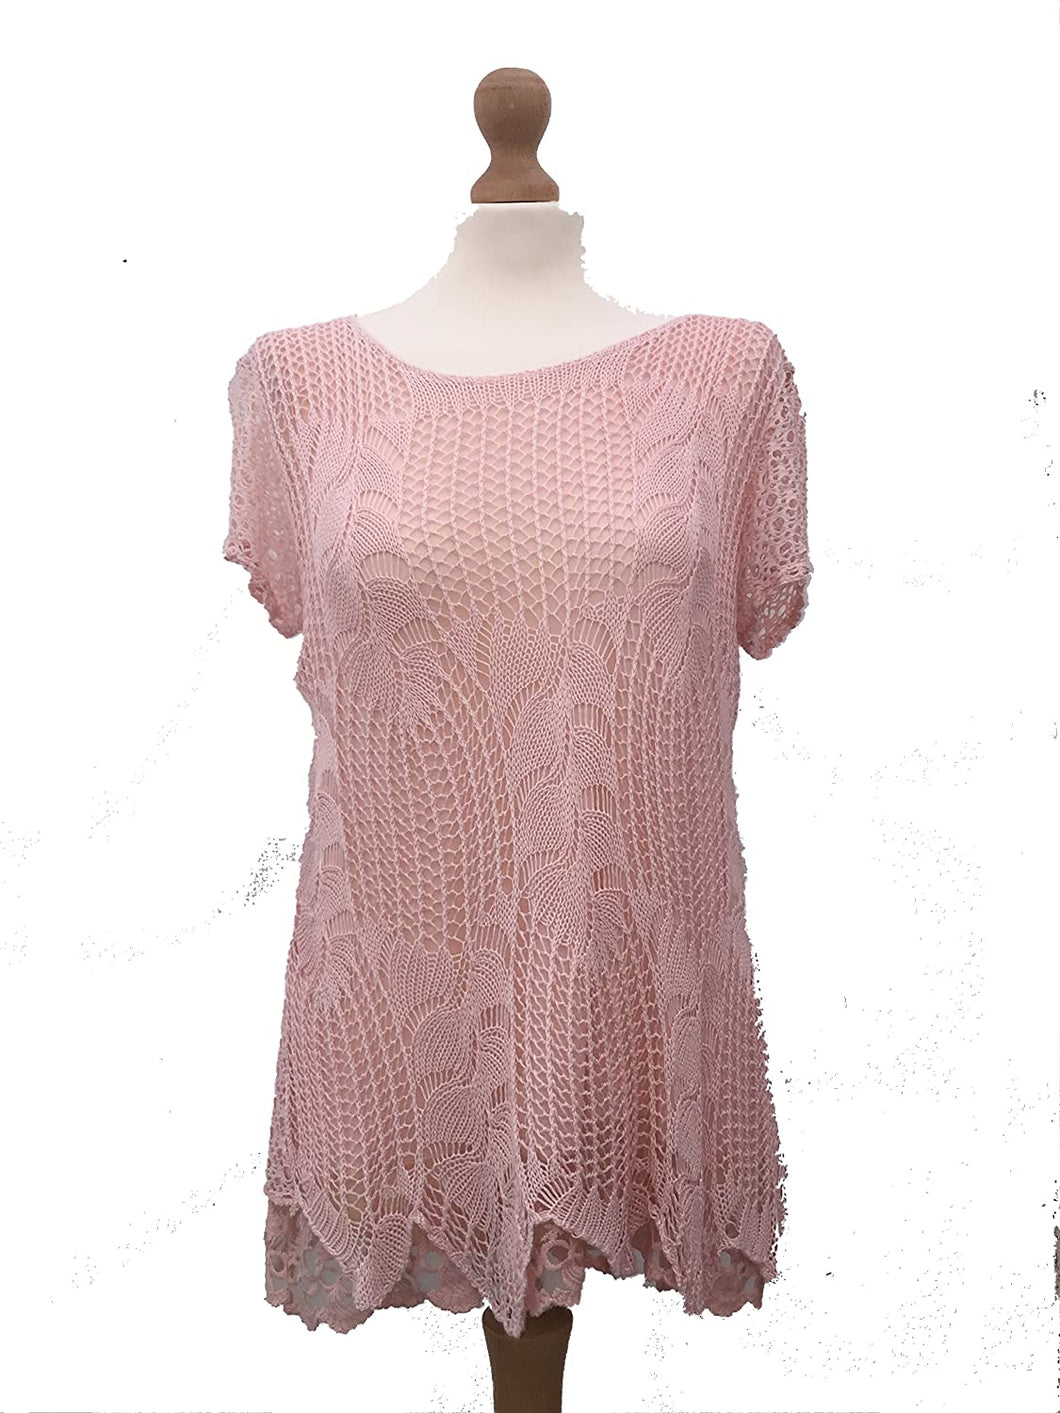 Pamper Yourself Now ltd Ladies Pink Crochet lace Short Sleeve top.Made in Italy (AA14)